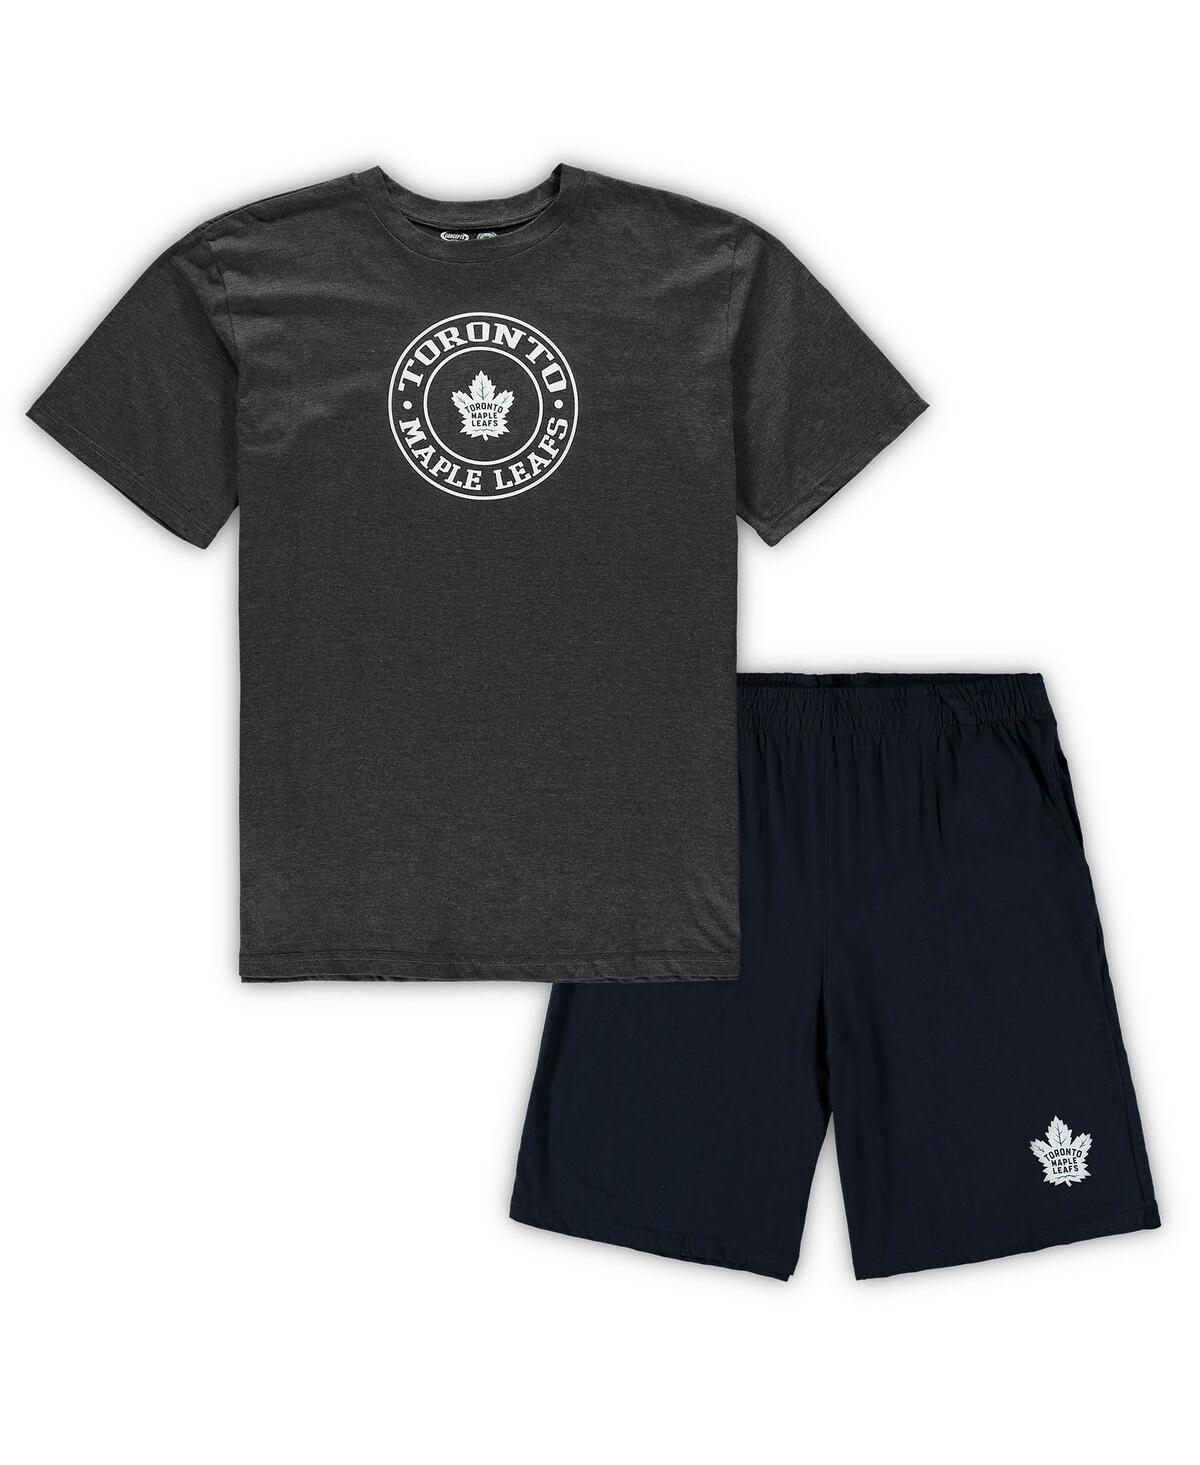 Men's Concepts Sport Navy, Heathered Charcoal Toronto Maple Leafs Big and Tall T-shirt and Shorts Sleep Set - Navy, Heathered Charcoal